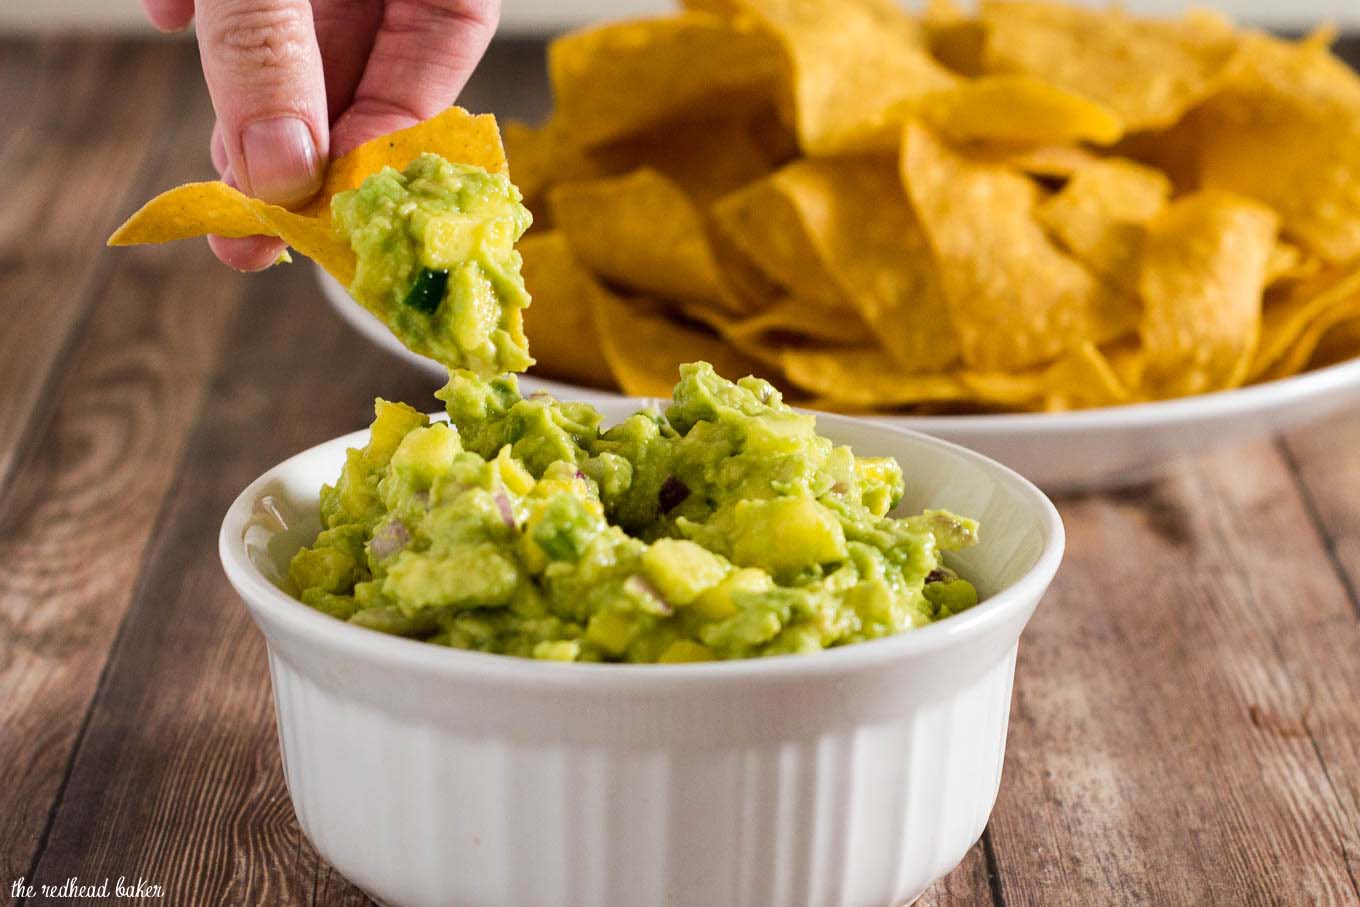 Tropical guacamole puts a sweet spin on a Mexican classic with the addition of pineapple and mango. Serve as a snack, appetizer or side dish!